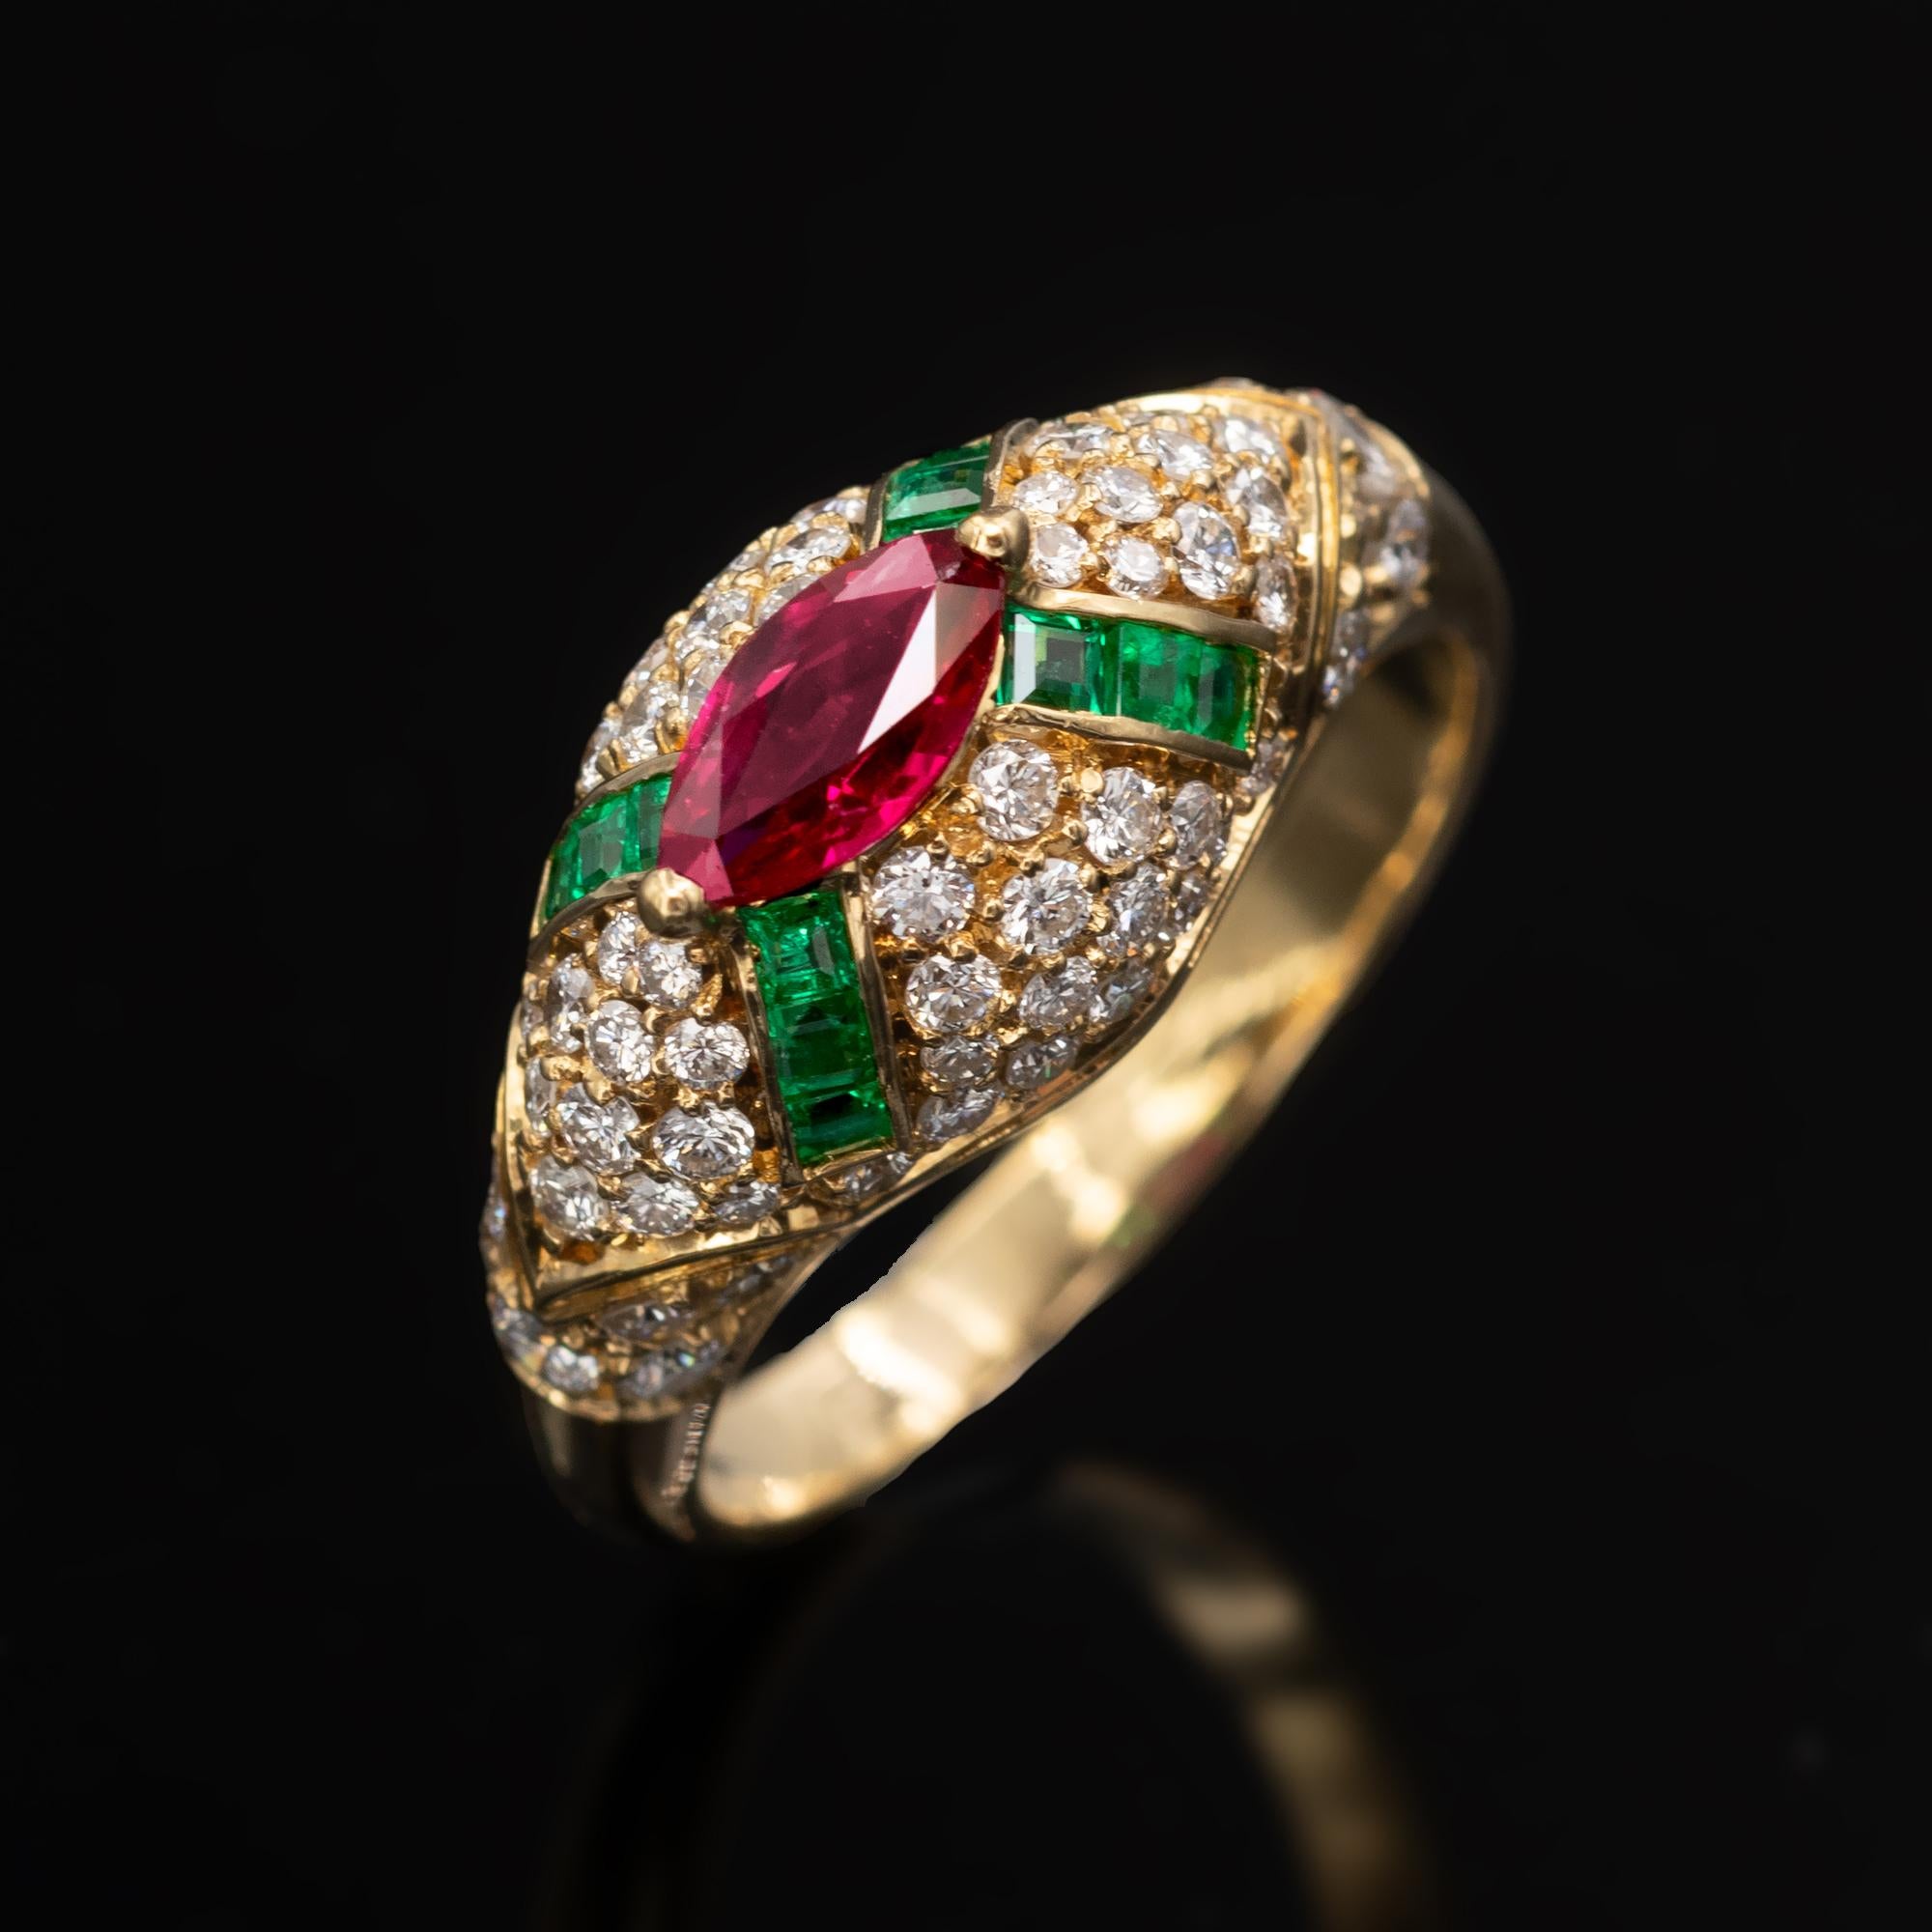 Exquisite ring with an artful design and make. It is a dome ring with a vivid red marquise cut ruby in its center, from which four lines of square emeralds radiate. The whole ring is pavé set with top-quality brilliant cut diamonds. The highly vivid